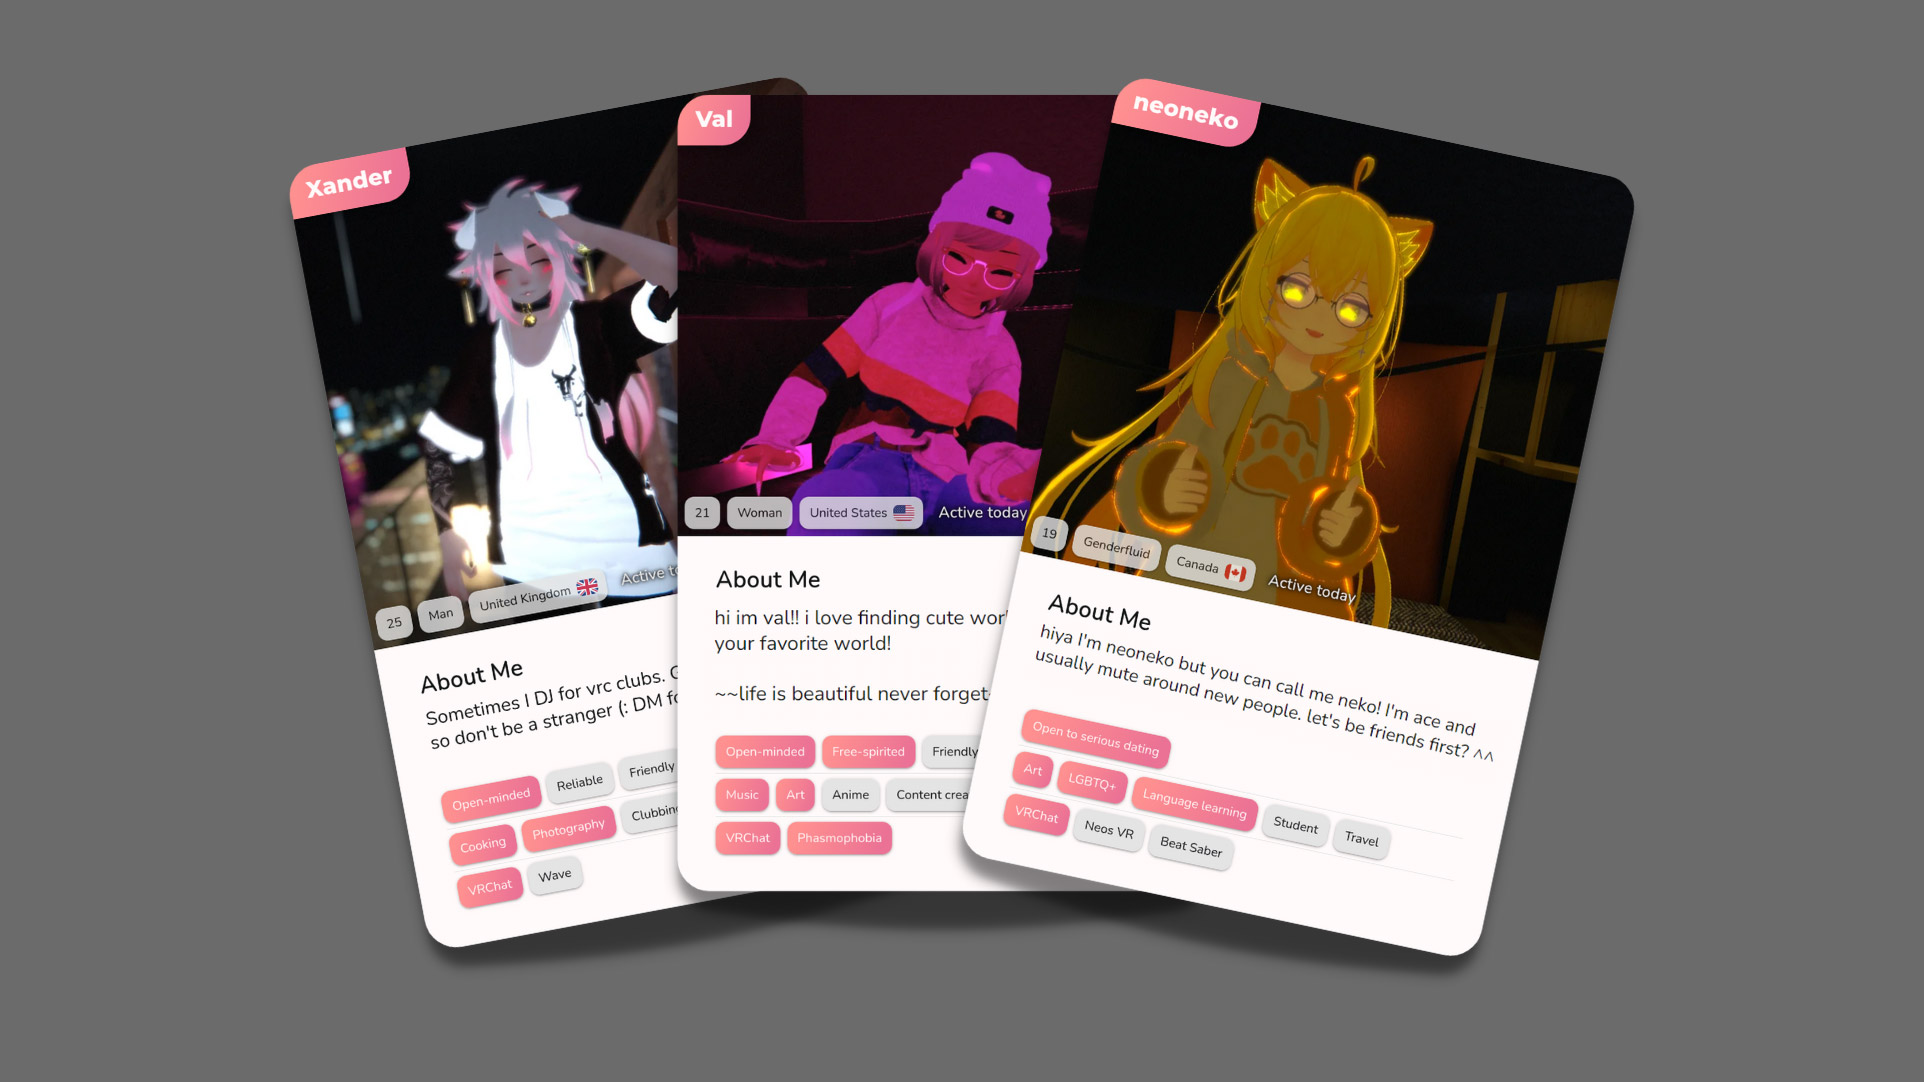 A Dating App for Meeting Avatars in VR Aims to Build Very Real Relationships